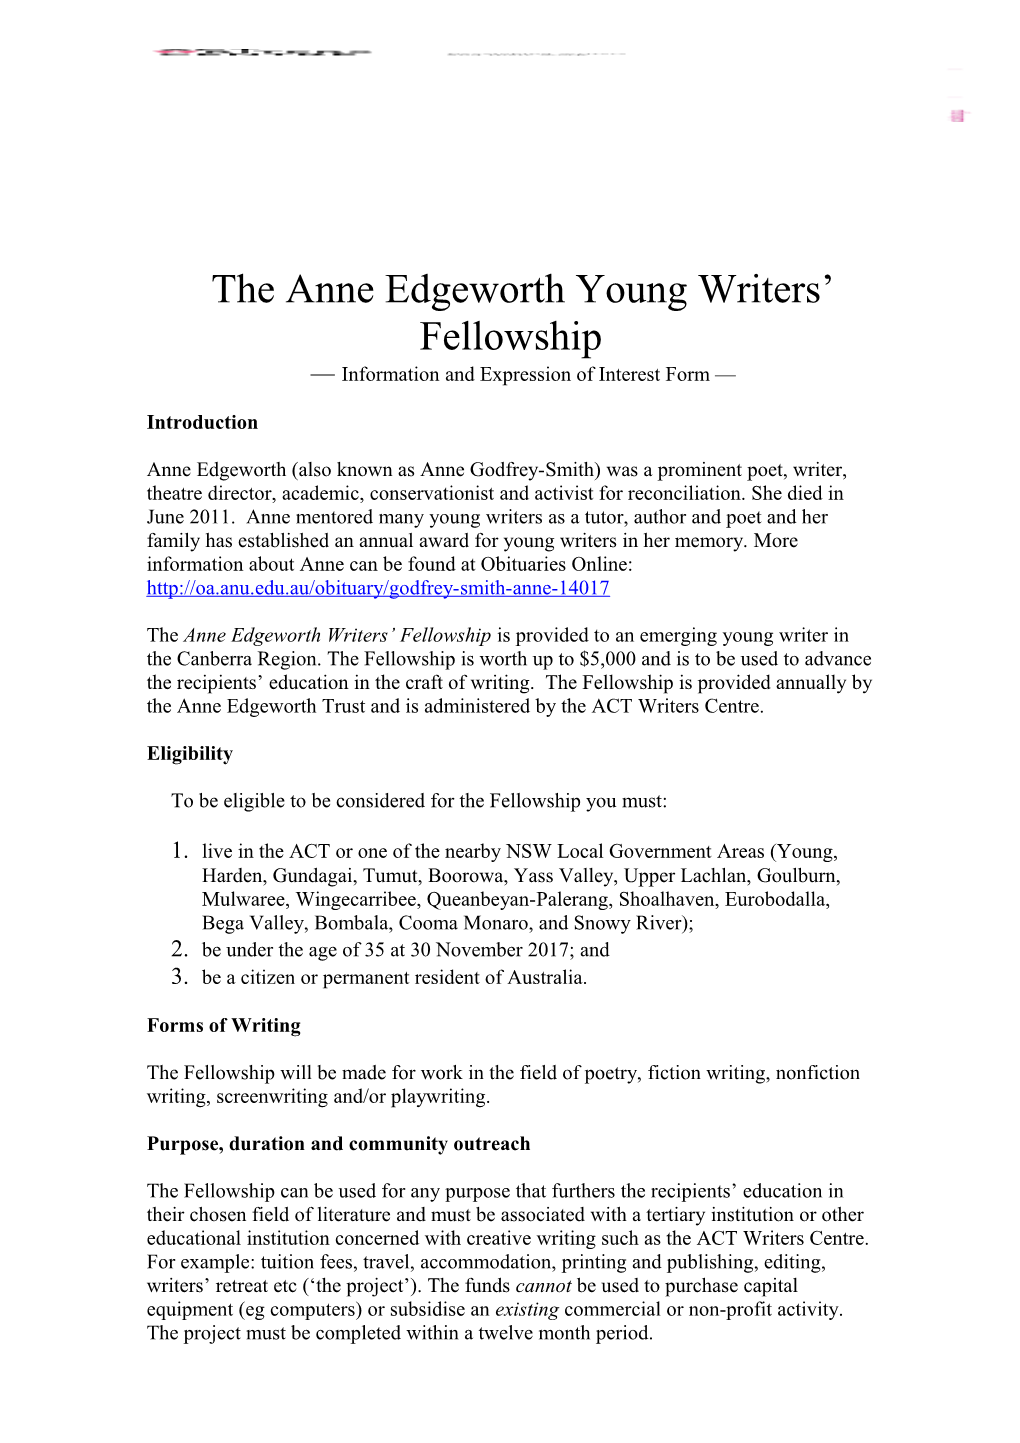 The Anne Edgeworth Young Writers Fellowship